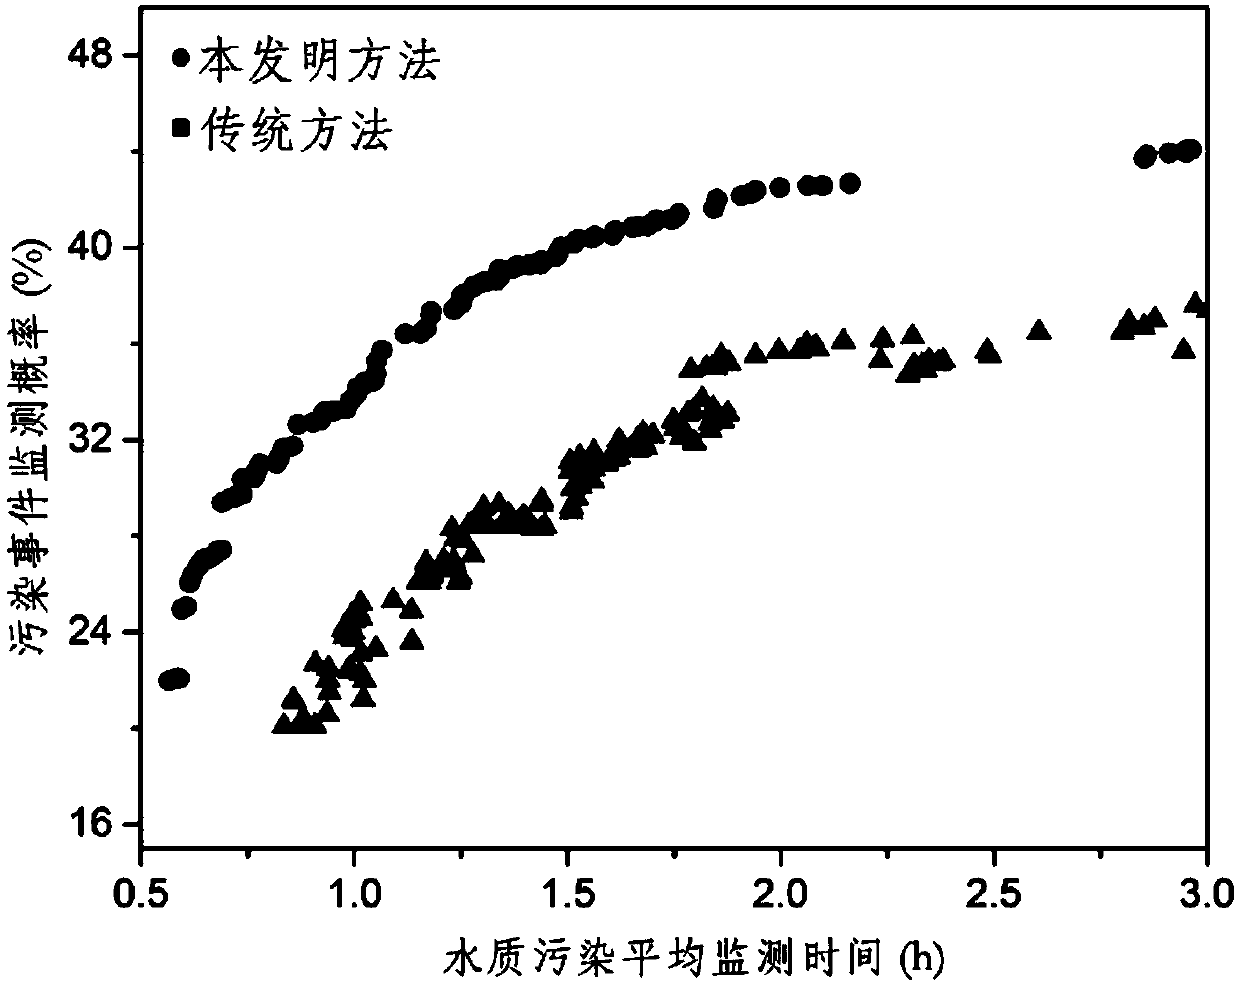 Engineering optimization method for improving water quality pollution monitoring efficiency of water supply pipe network